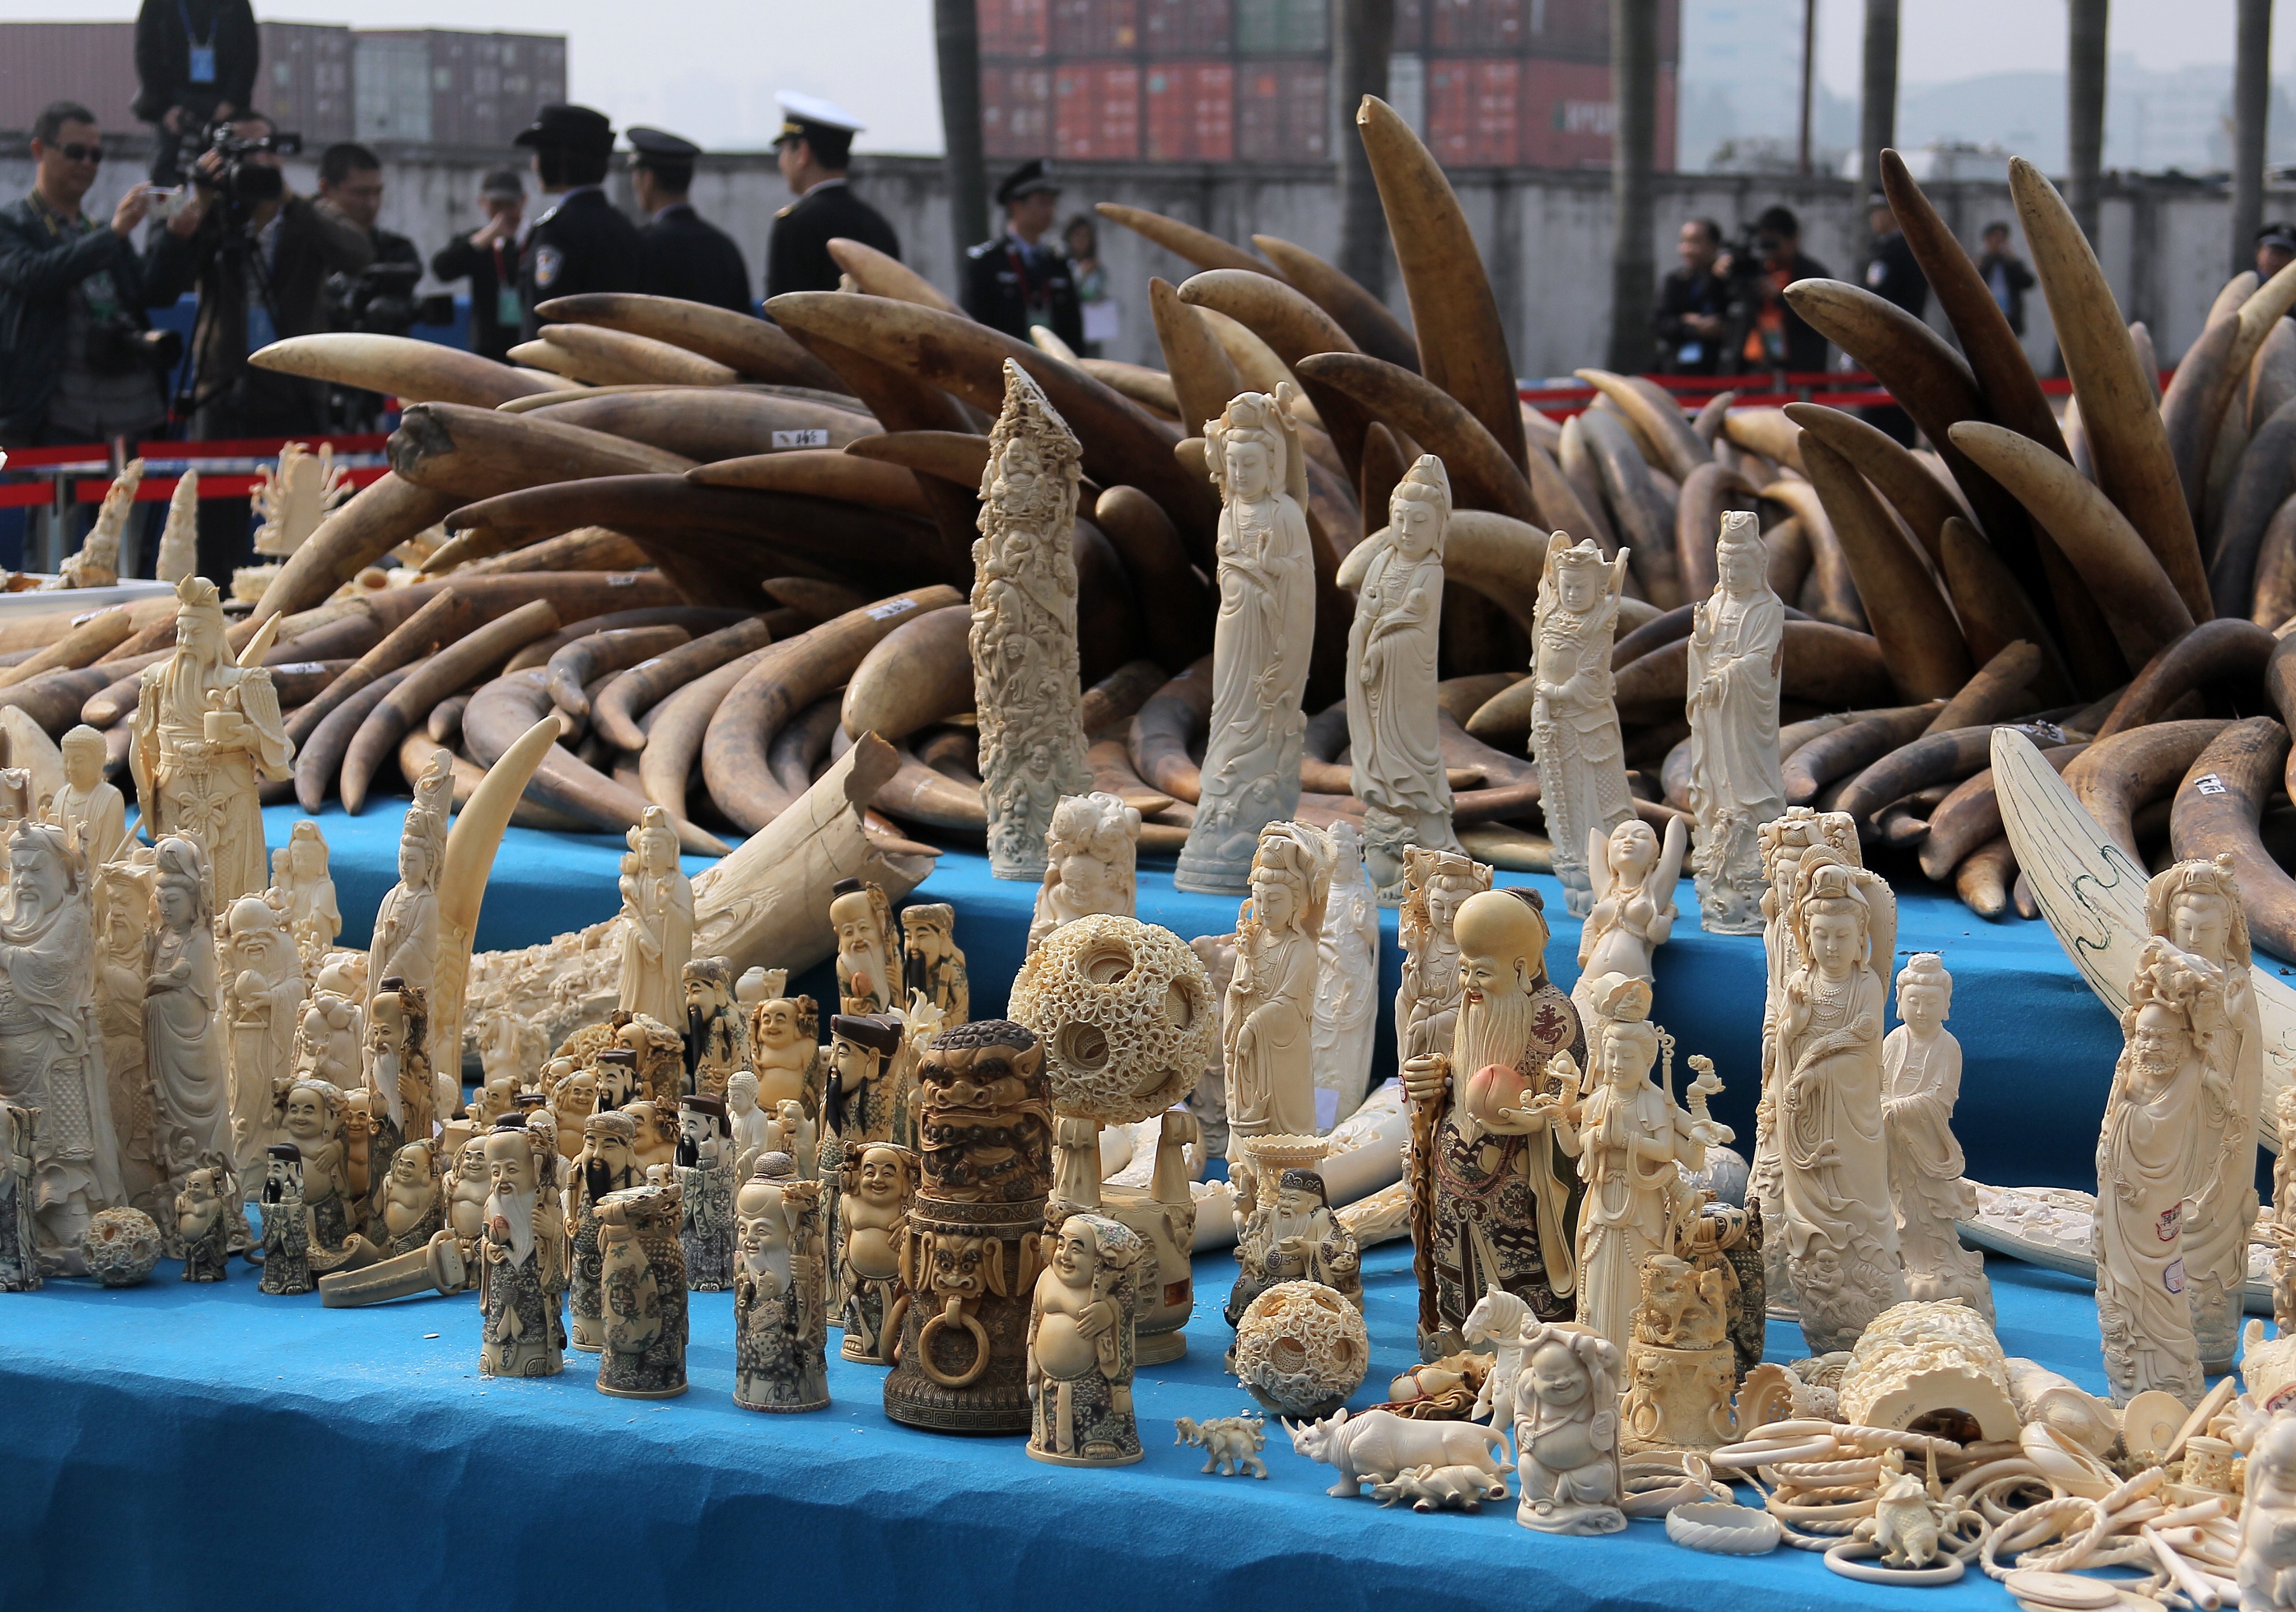 China vows shutdown of ivory trade by end of 2017 - CBS News